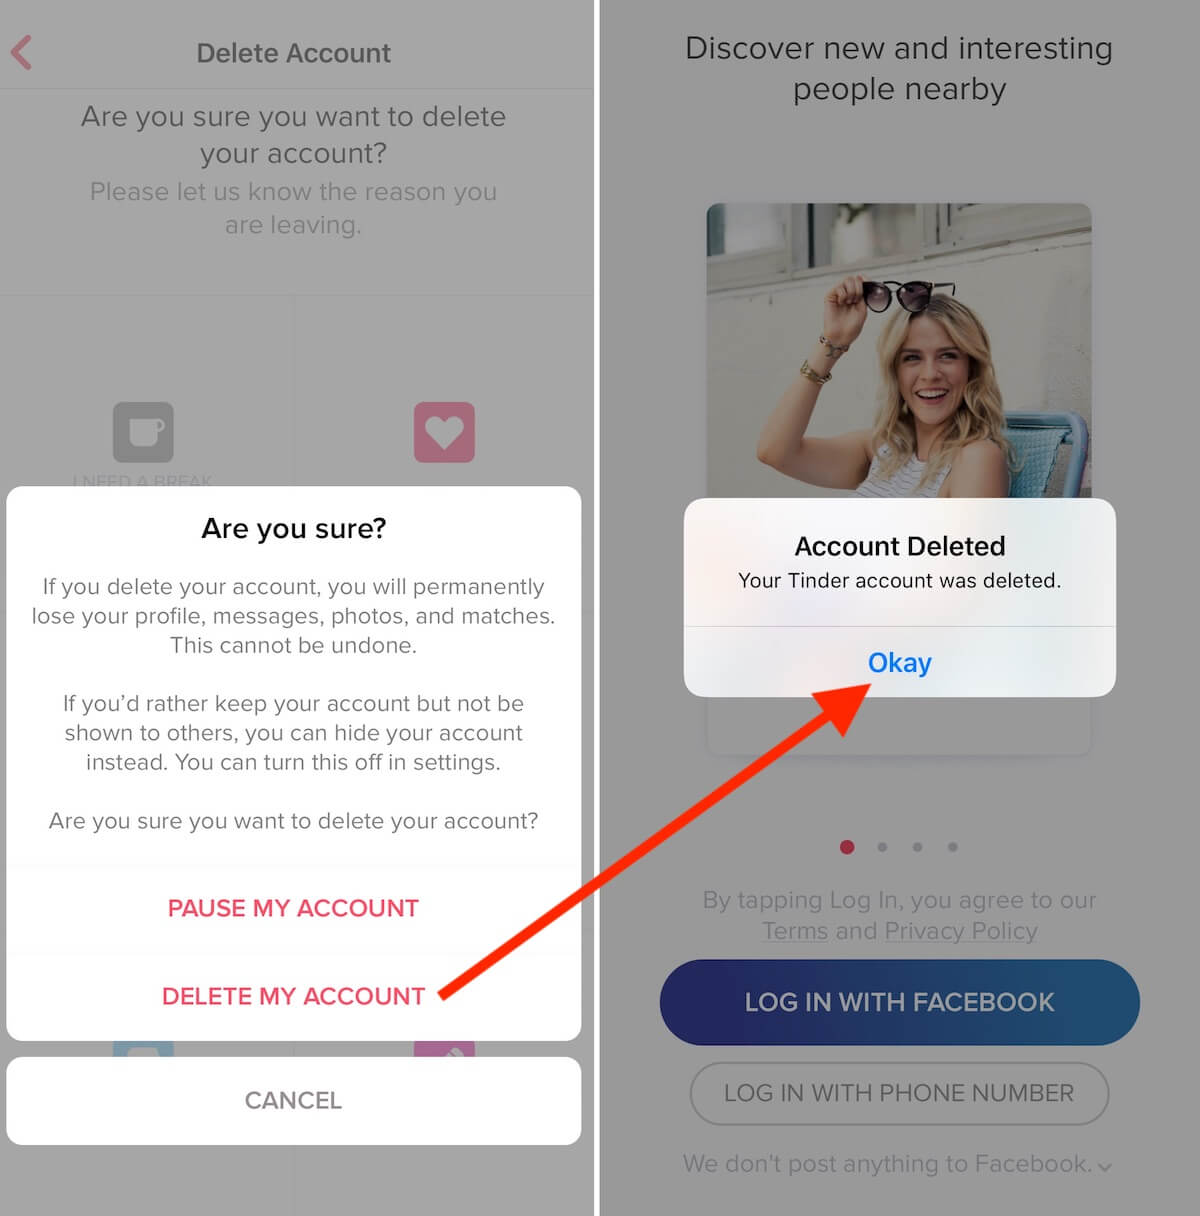 How to Permenently delete Tinder account on iOS Device Like iPhone